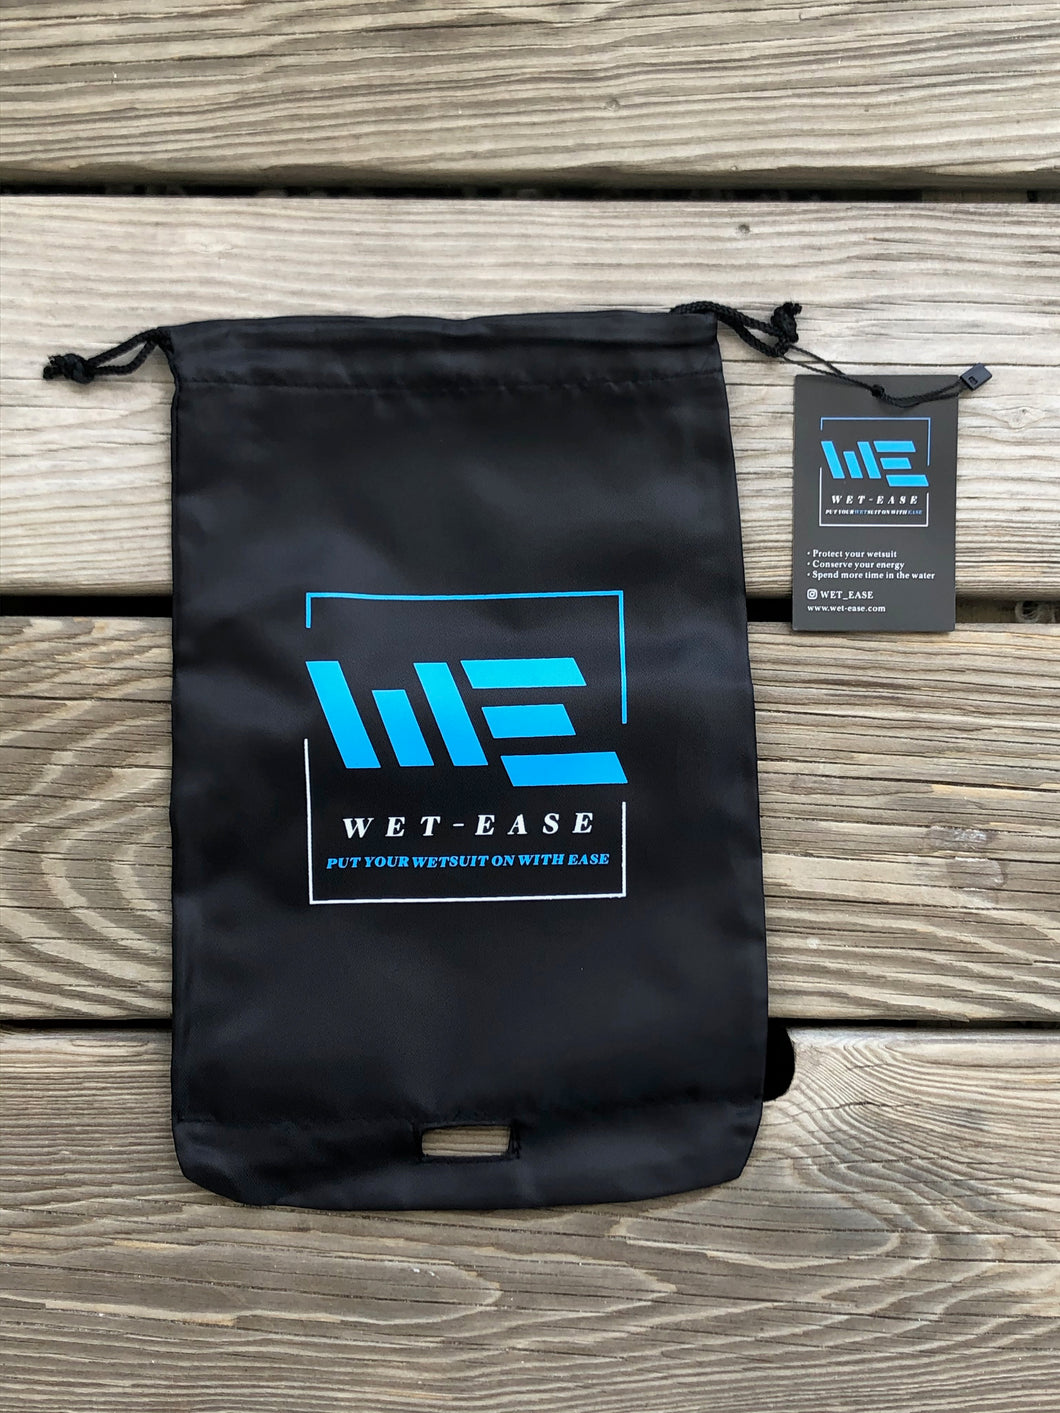 Bag that helps surfers, scuba divers, and triathletes put a wetsuit on with ease